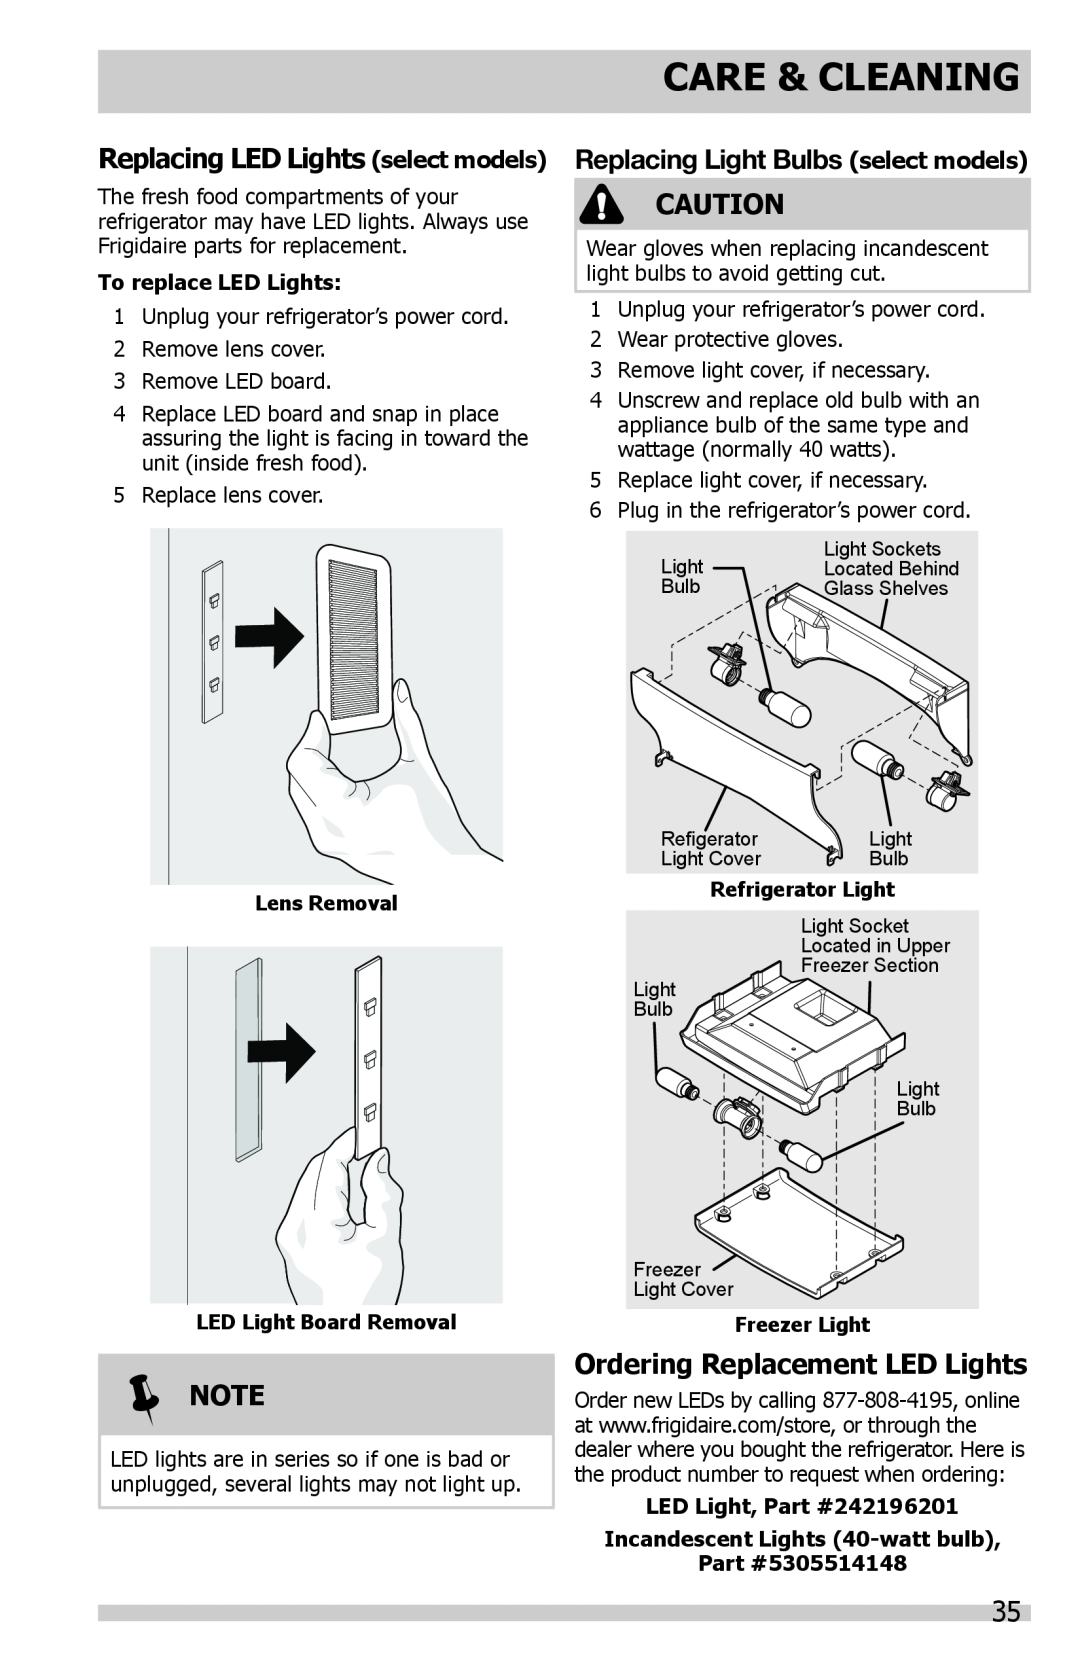 Frigidaire DGHF2360PF Replacing LED Lights select models, Ordering Replacement LED Lights, Care & Cleaning, Note 